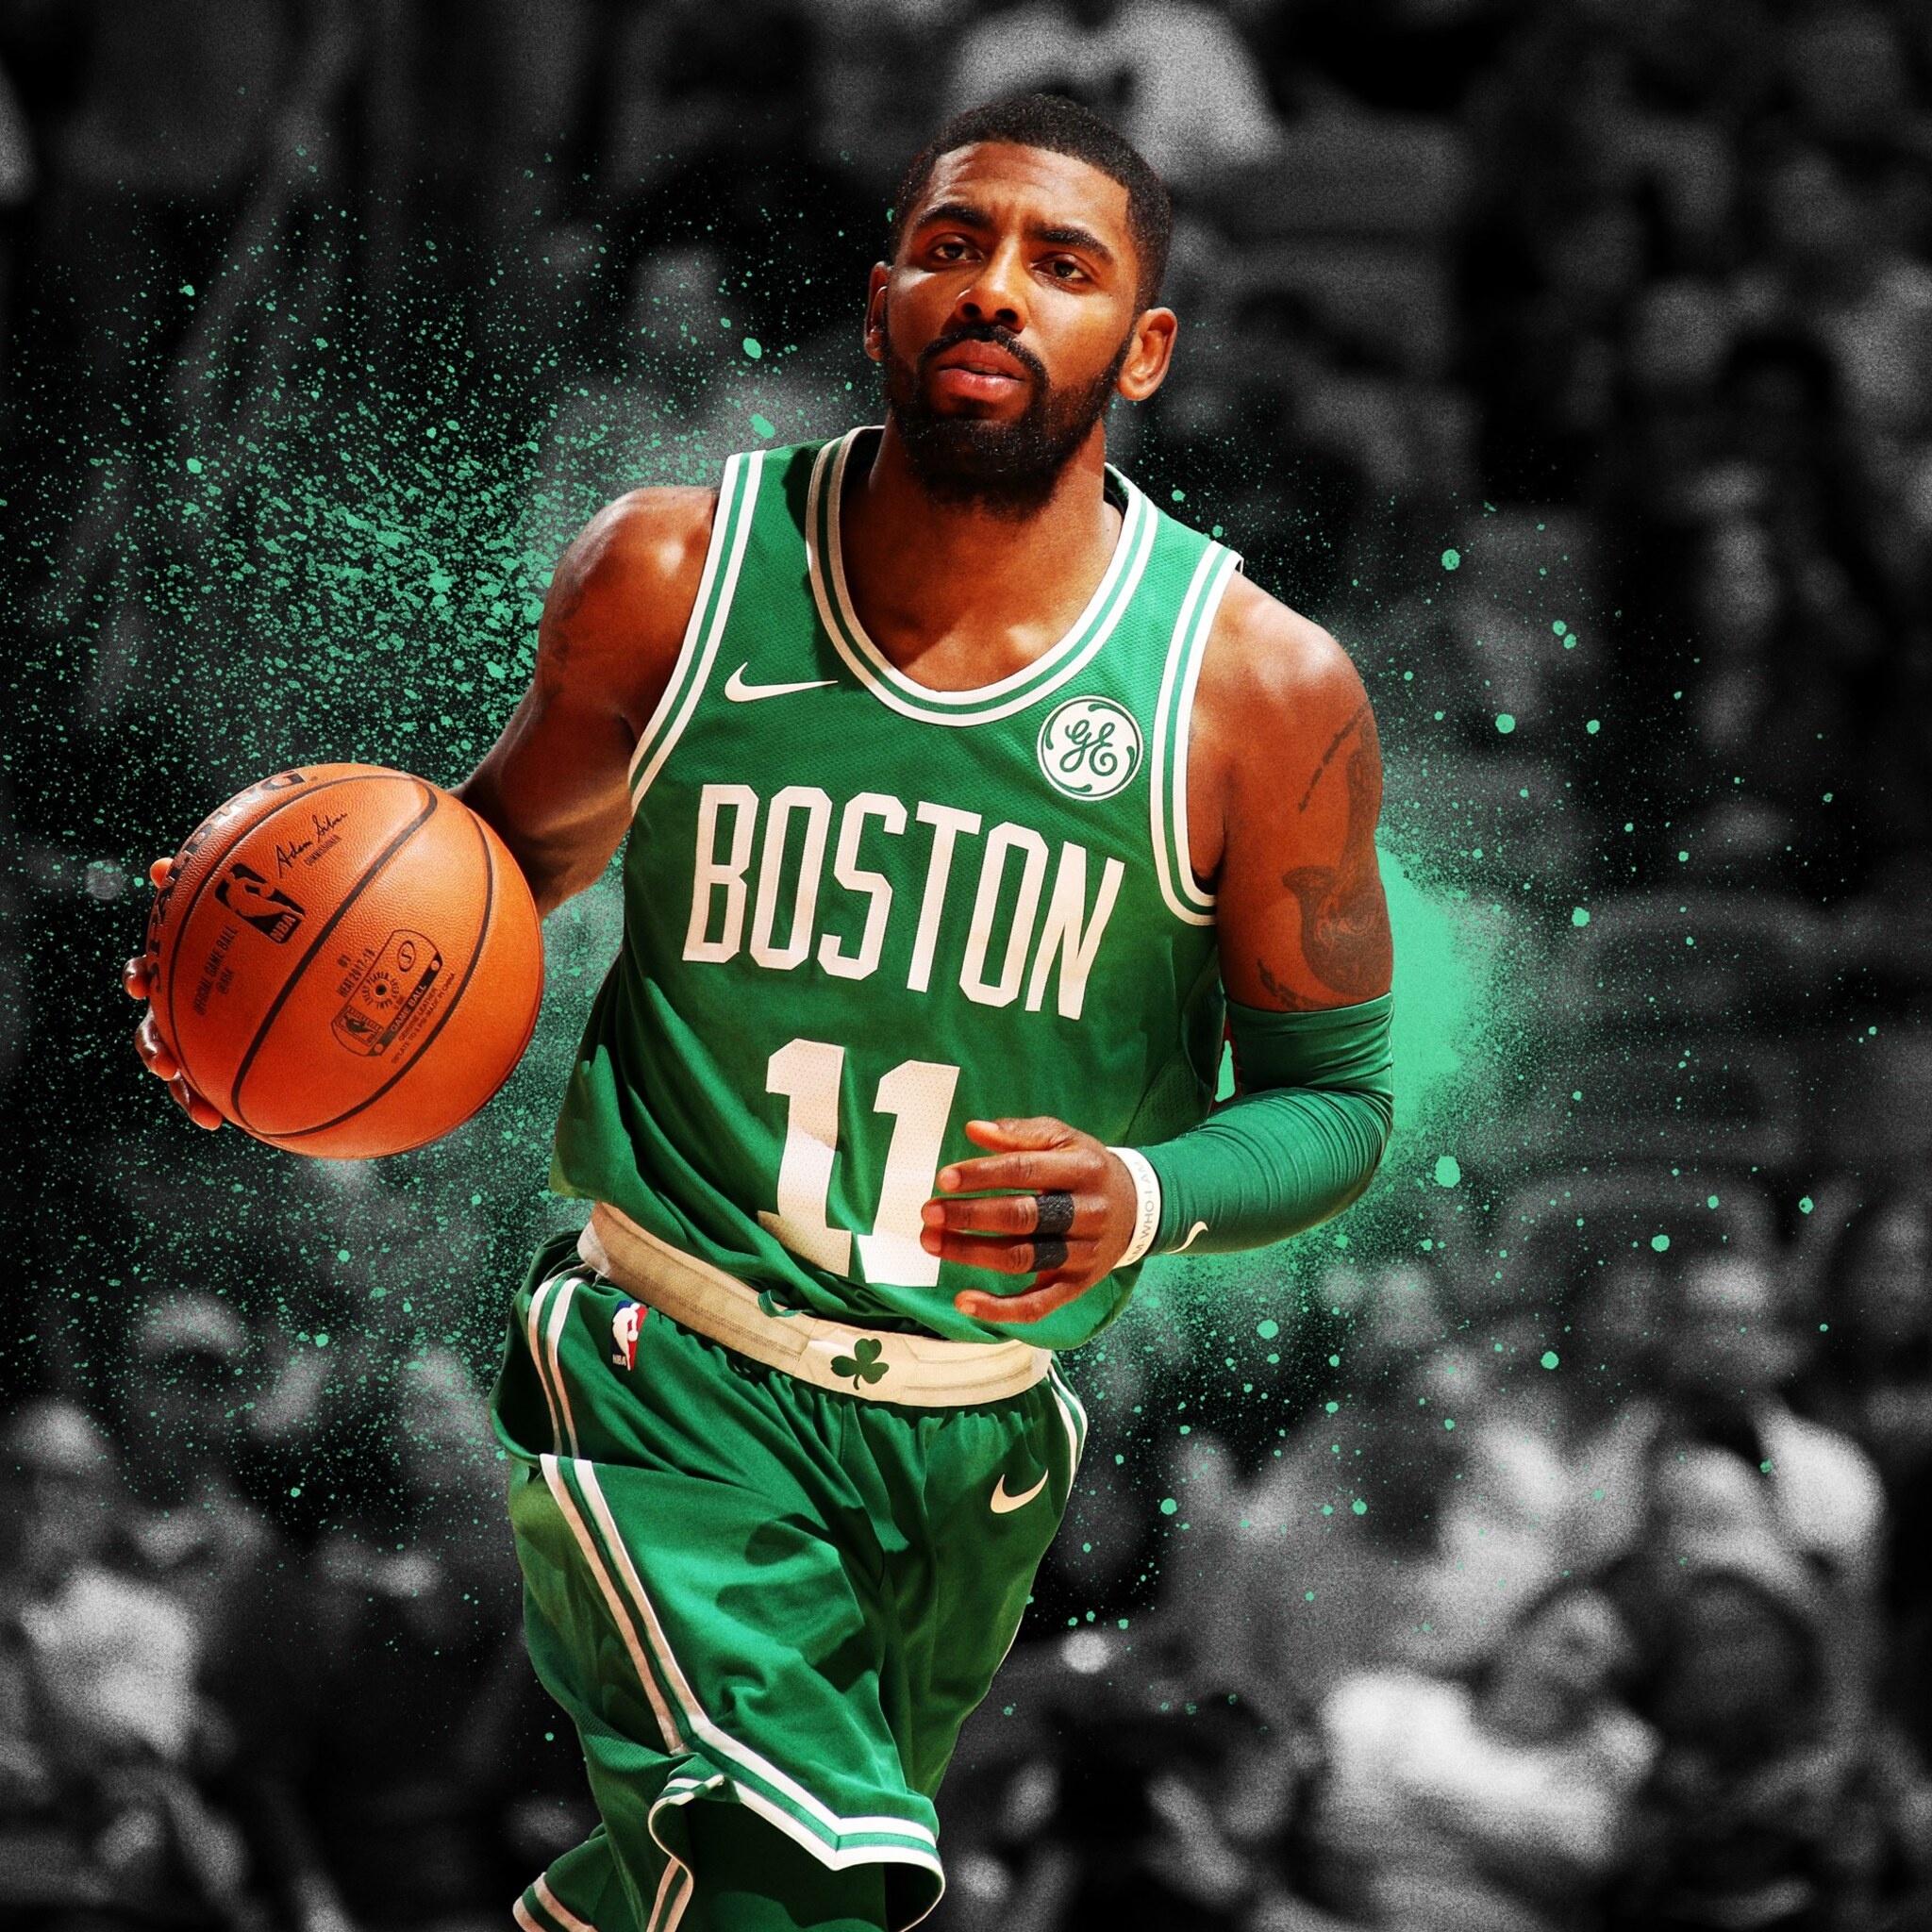 Boston Celtics, Kyrie Irving, iPad Air wallpapers, Player images, 2050x2050 HD Handy